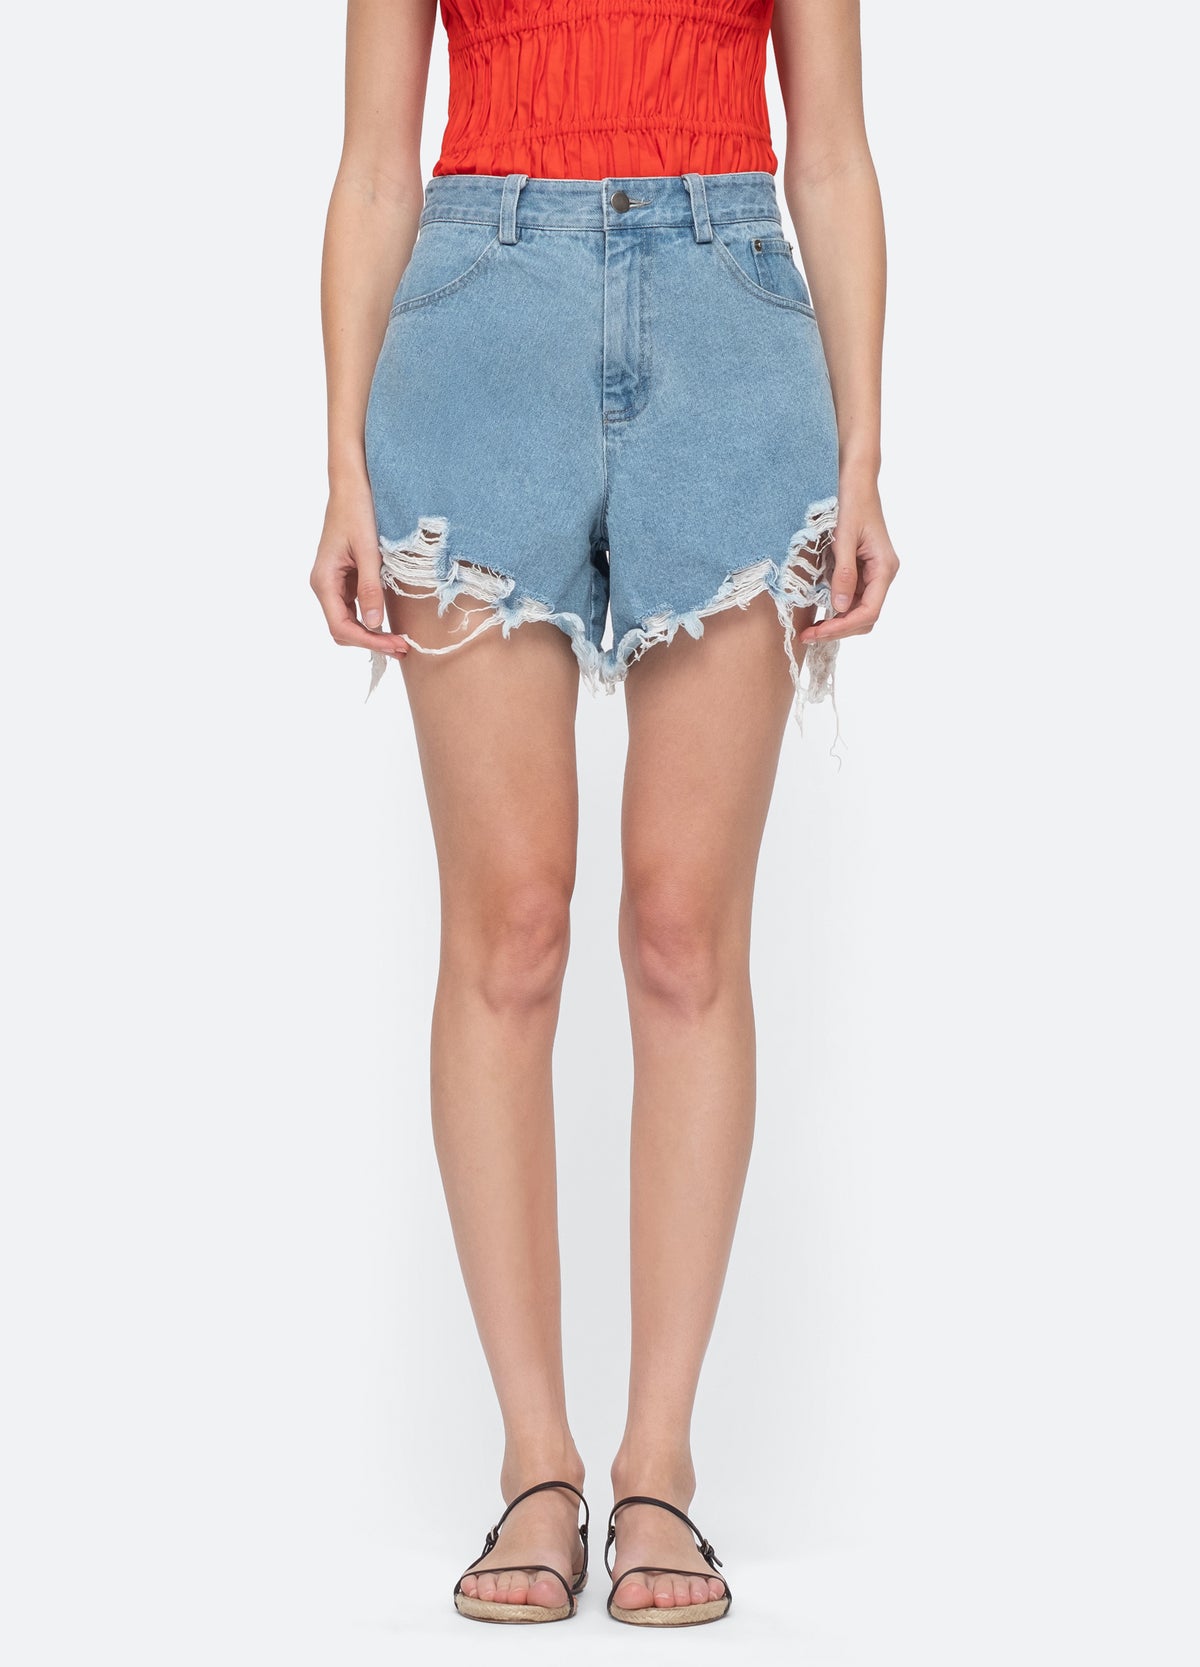 blue-oona shorts-front view